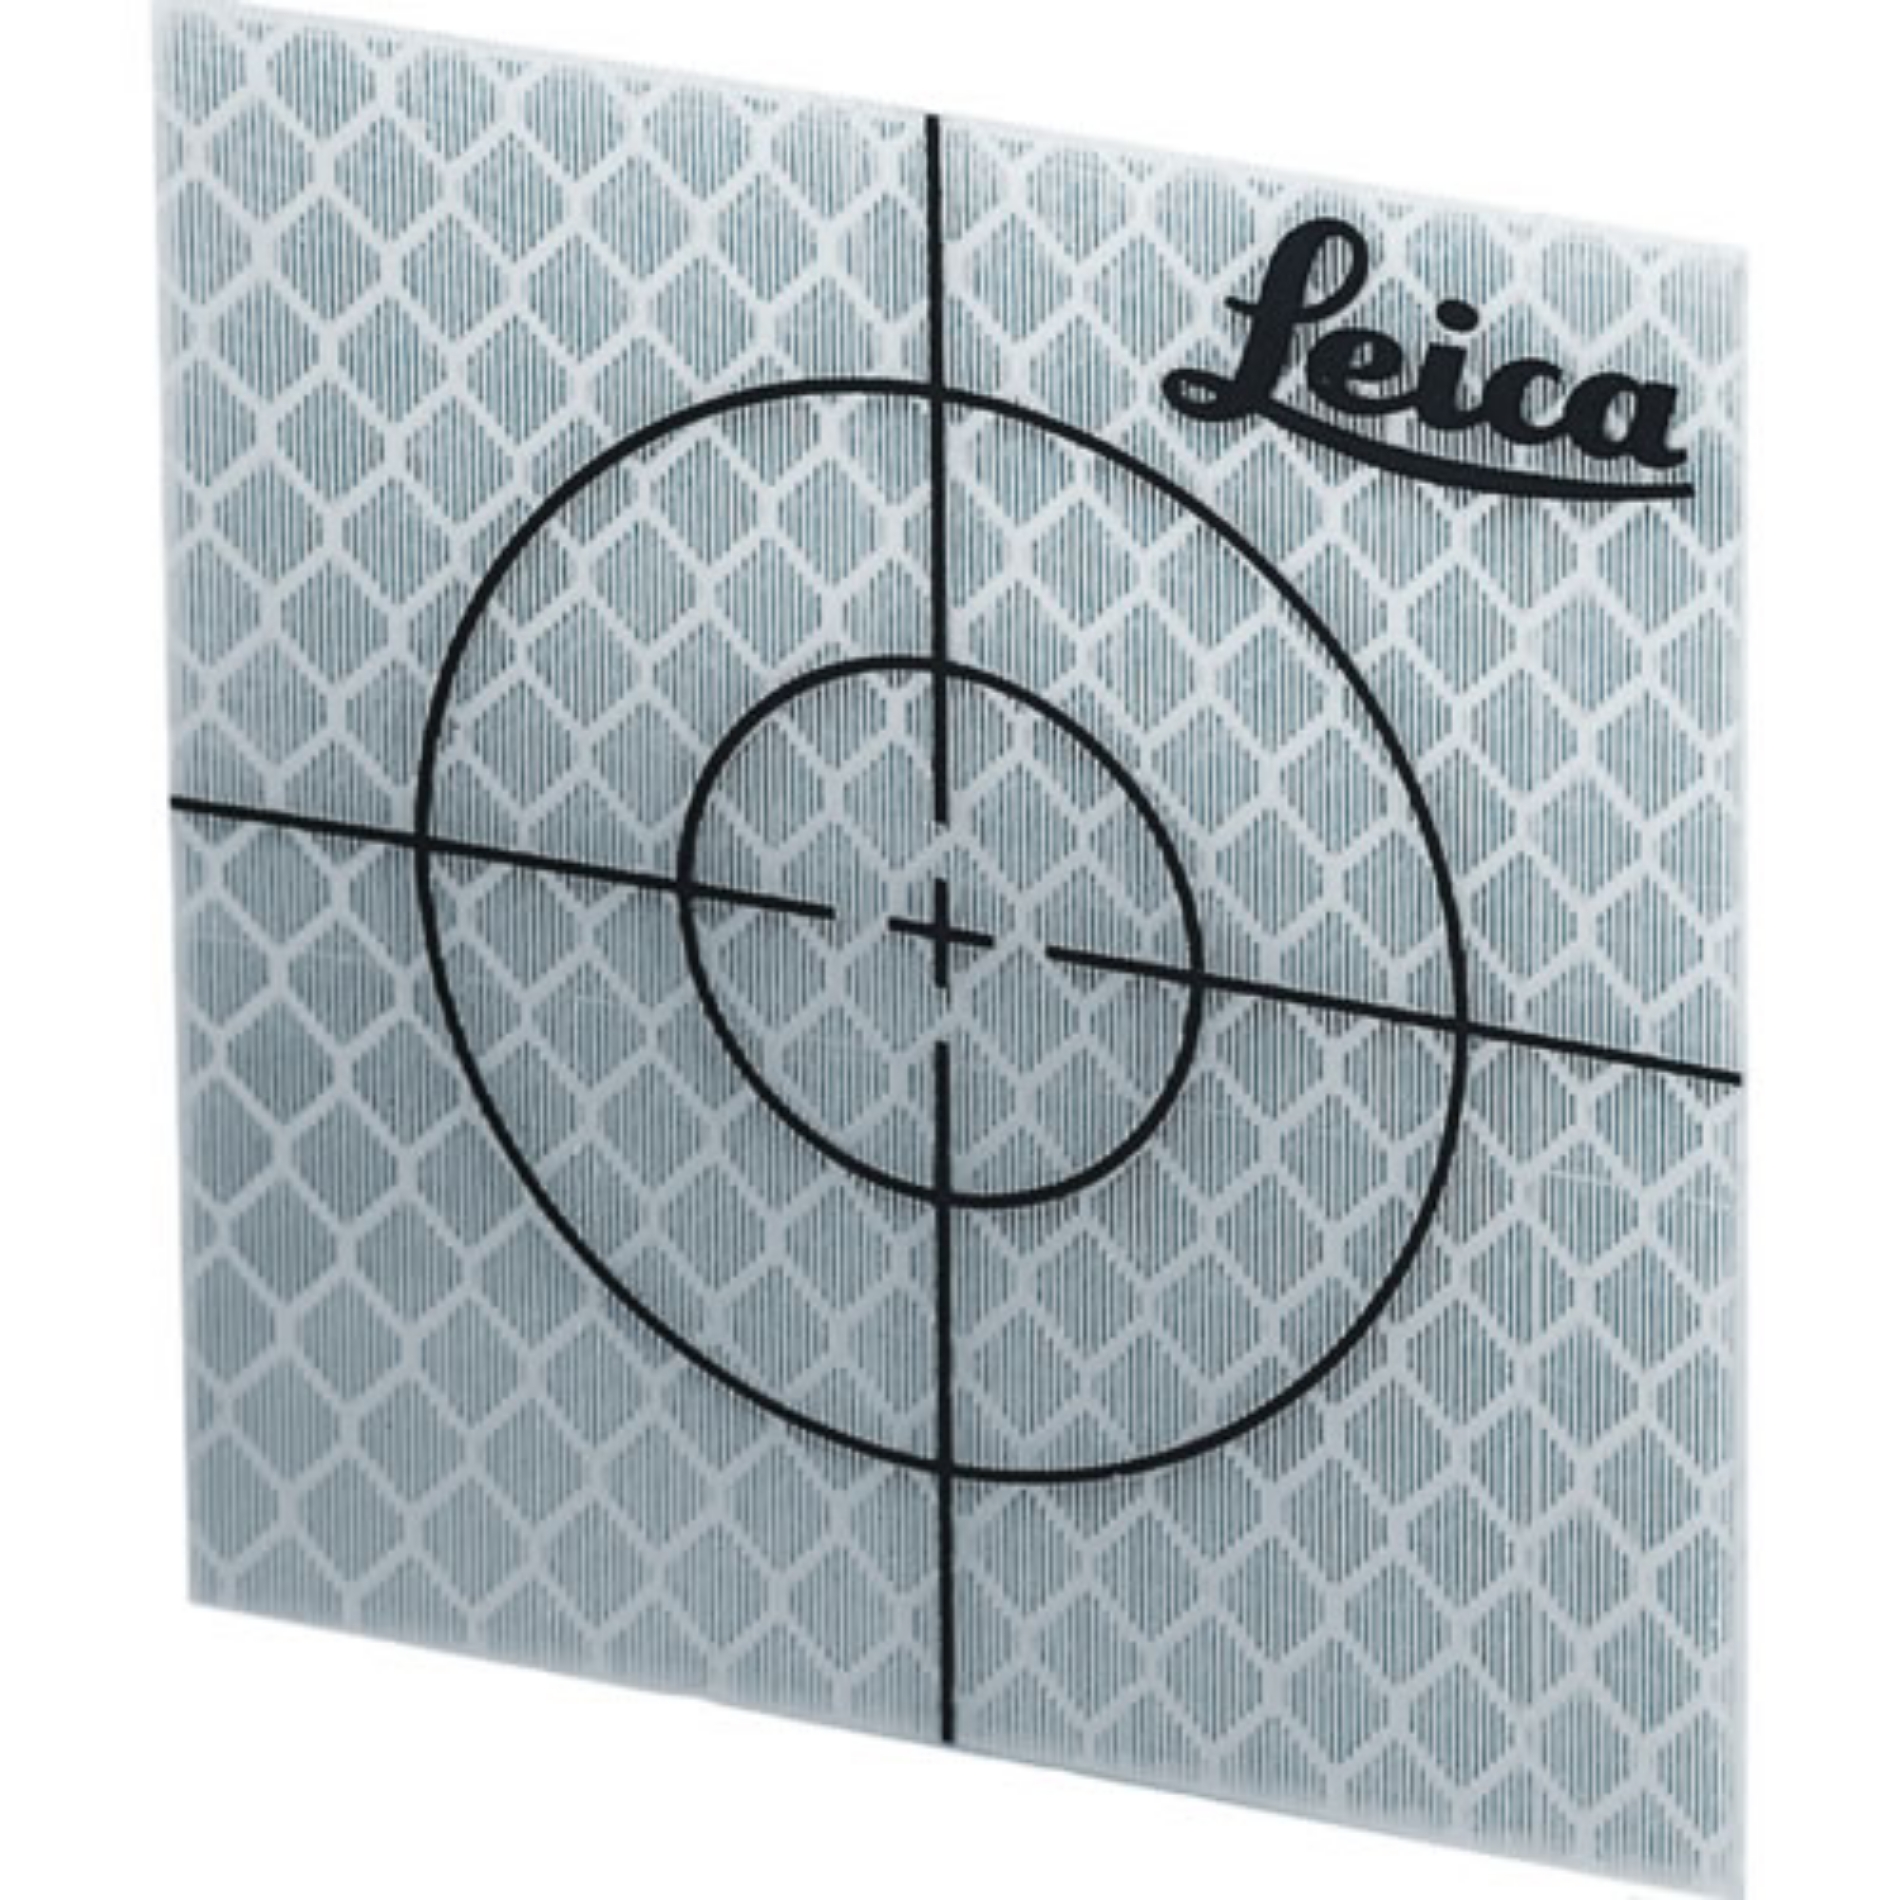 Picture of Leica GZM31 Retro Reflective Target